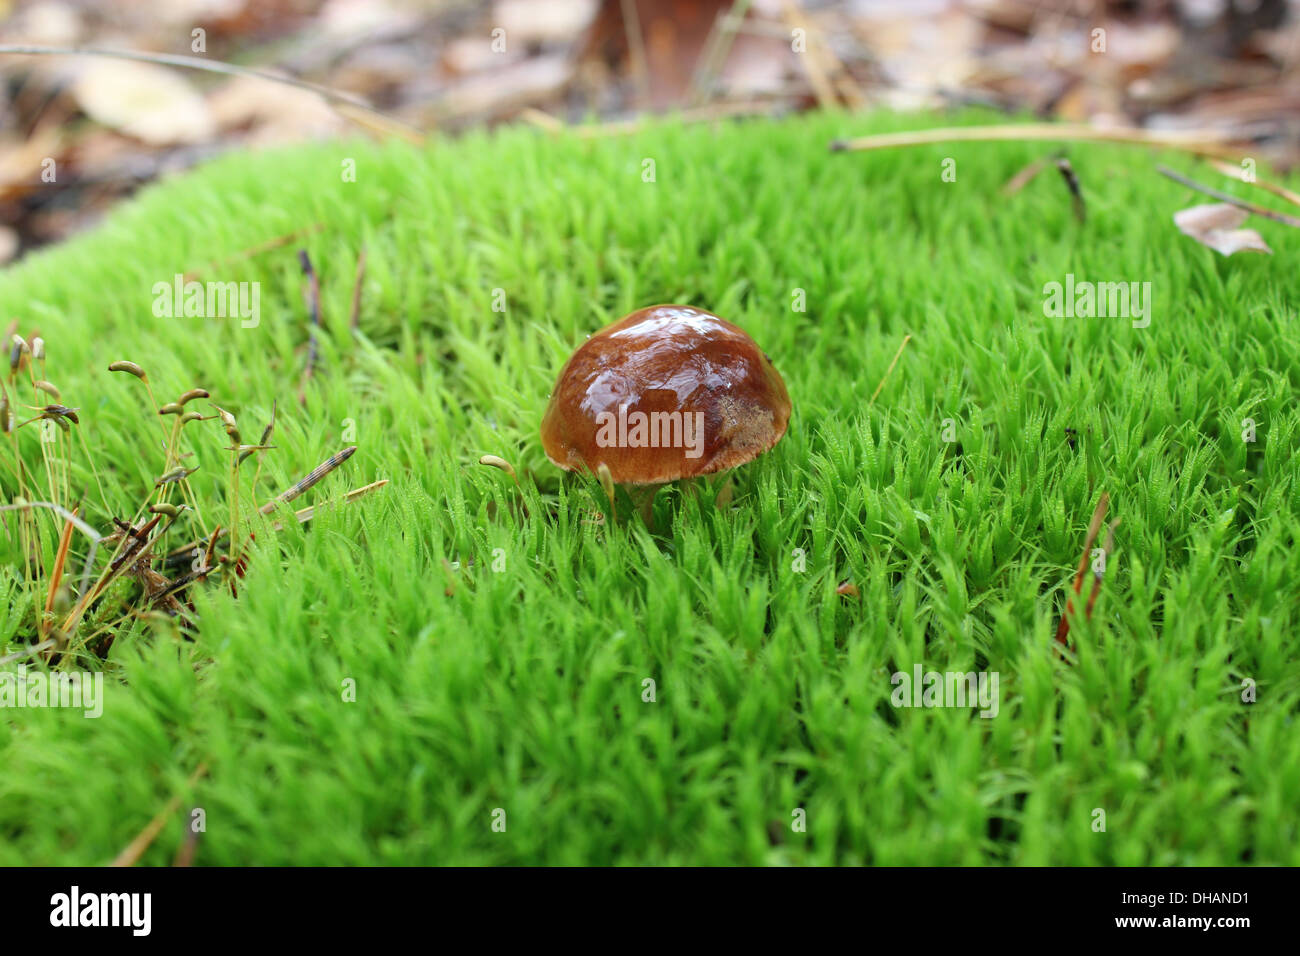 nice mushroom with brown cap in the green moss Stock Photo